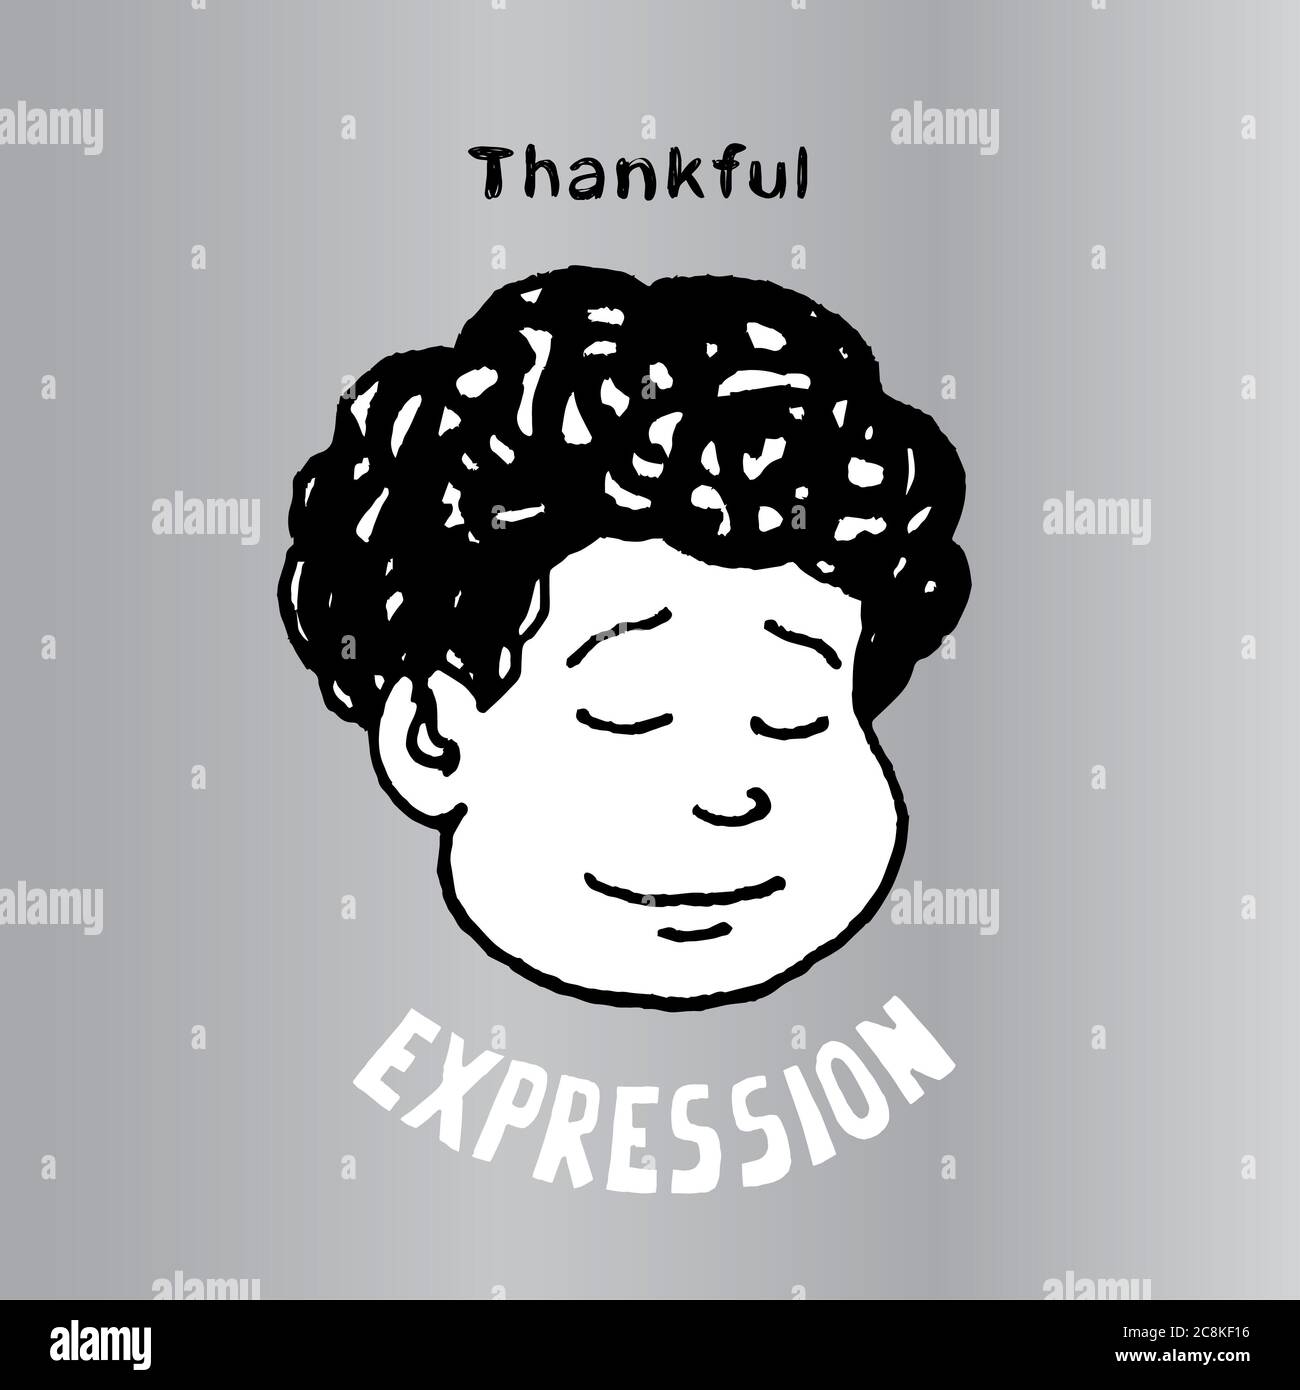 Thankful face vector illustration. Interesting Cartoon character. Used as emoticons and emojis. Stock Photo